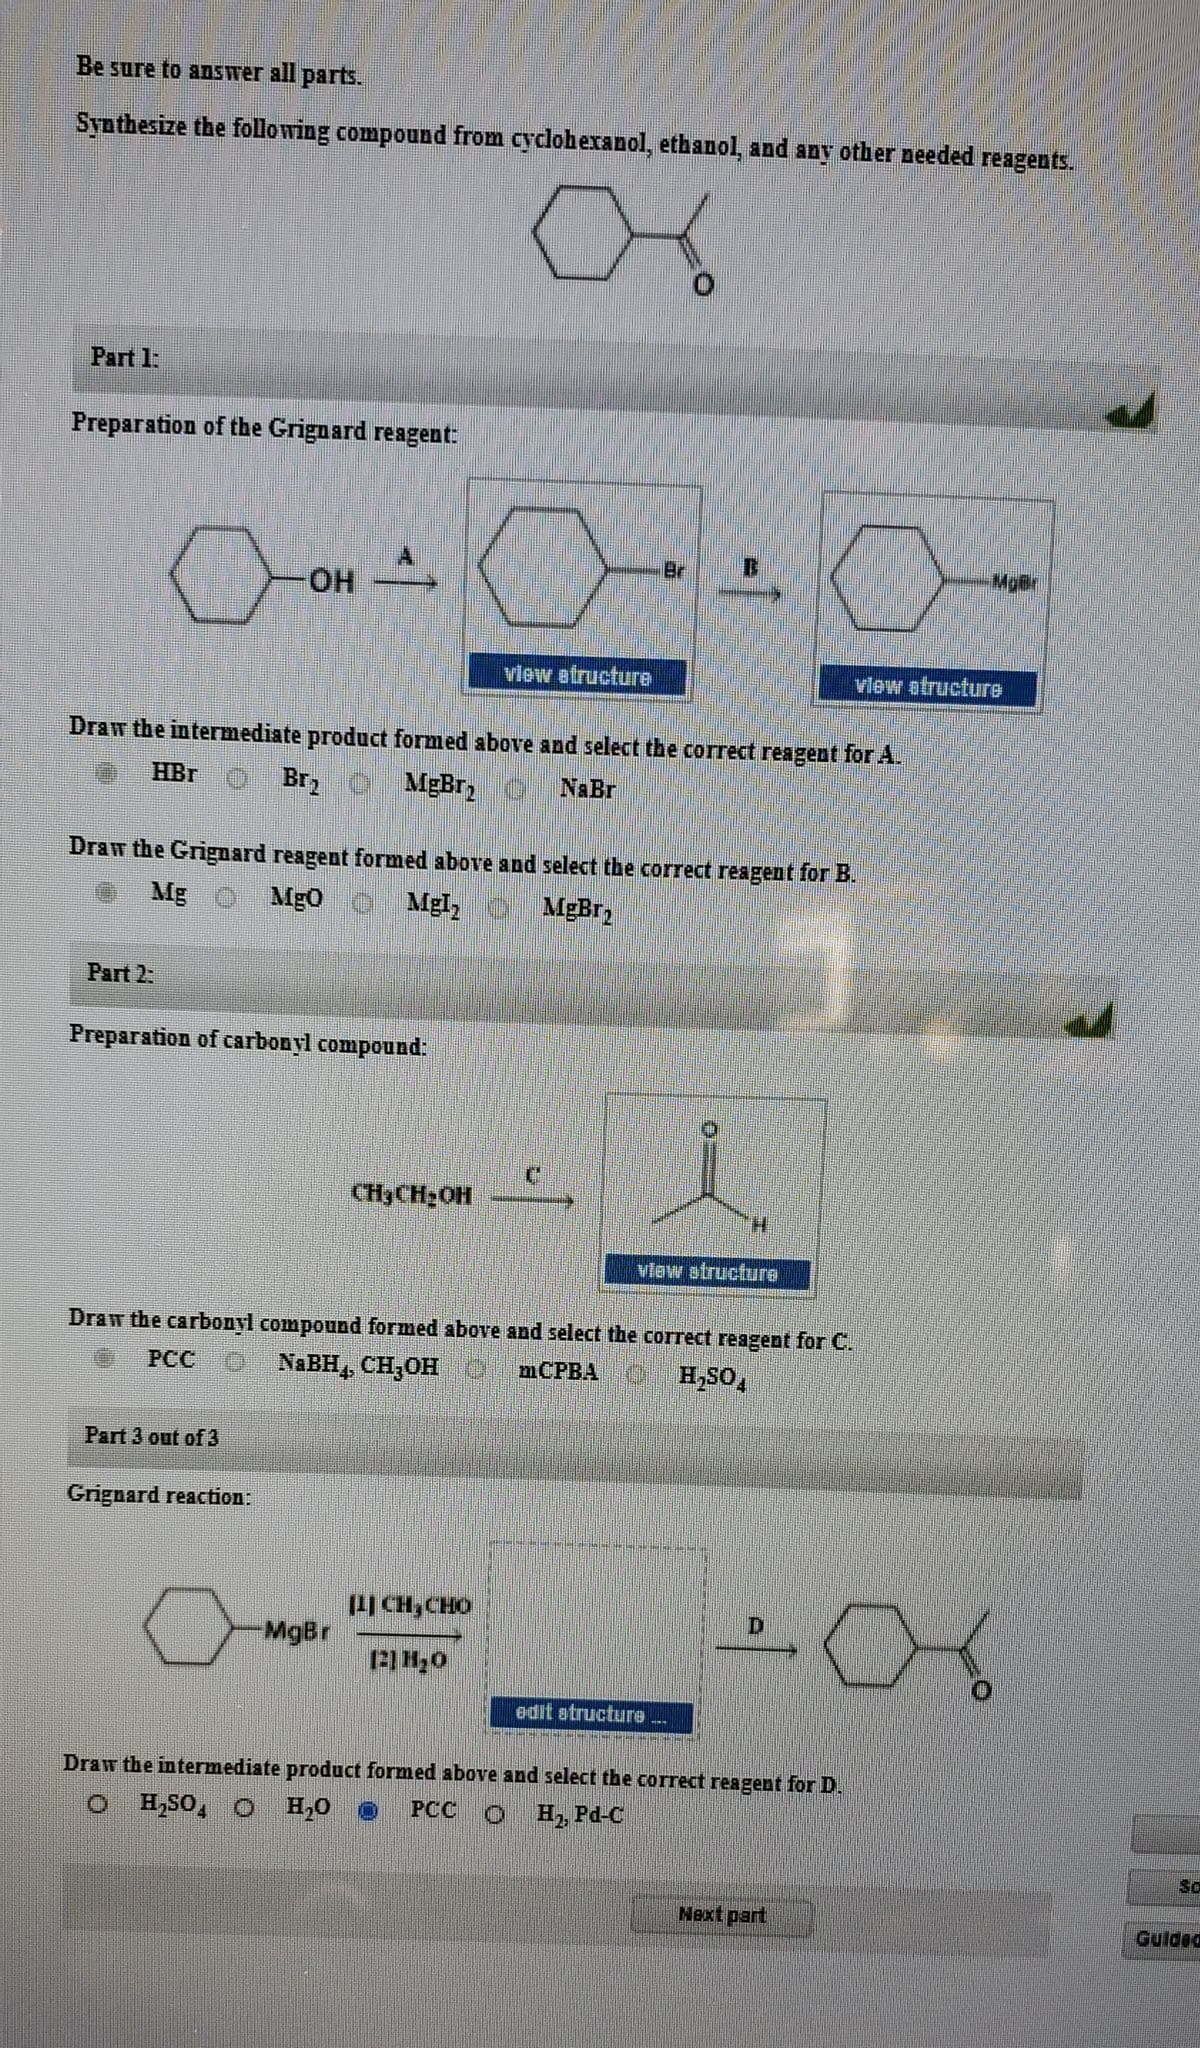 Be sure to answer all parts.
Synthesize the following compound from cyclohexanol, ethanol, and any other needed reagents.
Part 1:
Preparation of the Grignard reagent:
Br
HO-
vlew atructure
vlew atructure
Draw the intermediate product formed above and select the correct reagent forA.
HBr O Brz C MĘBR, O
NaBr
Draw the Grignard reagent formed above and select the correct reagent for B.
Mg O Mg0 O Mgl, MgBr,
Part 2:
Preparation of carbonyl compound:
CH3CH2OH
vlew structure
Draw the carbonyl compound formed above and select the correct reagent for C.
PCC O NABH,, CH,OH O
mCPBA H,SO,
Part 3 out of 3
Grignard reaction:
|CH,CHO
MgBr
edit atructure
Draw the intermediate product formed above and select thbe correct reagent for D.
O HSO, O H,0 0
PCC O H2, Pd-C
So
Next part
Gulded
